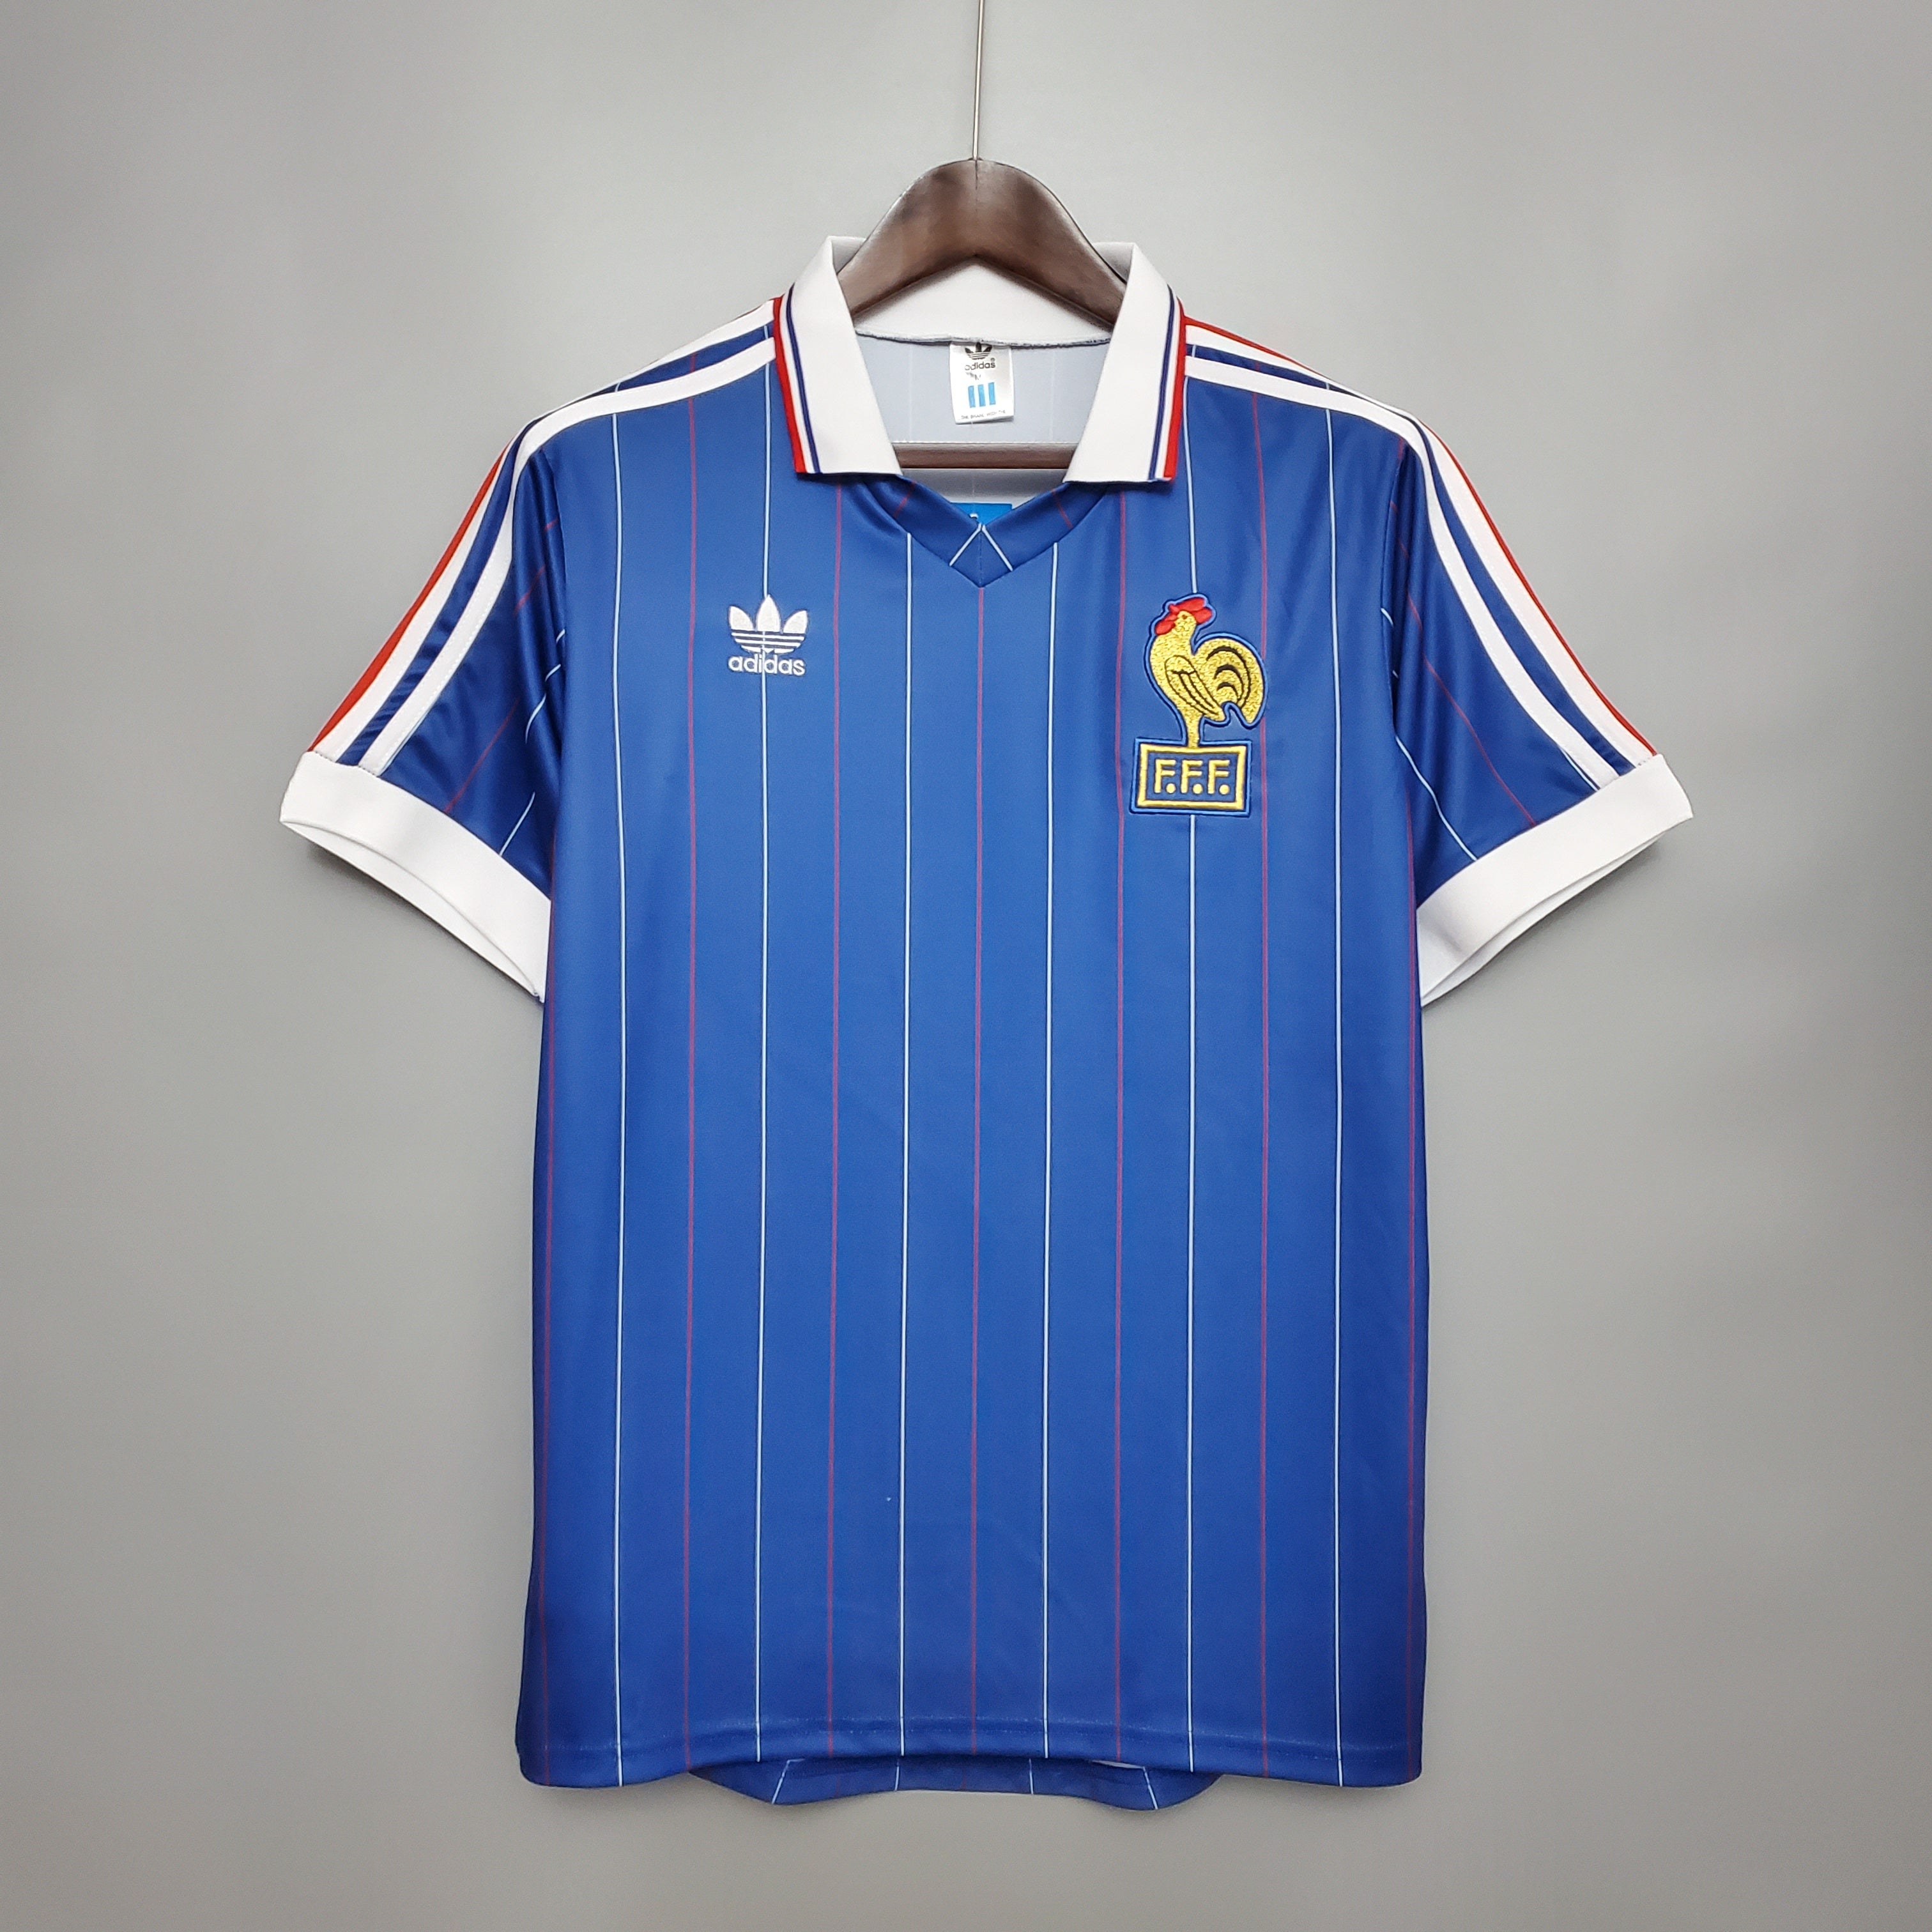 France 1982 World Cup Retro Jersey